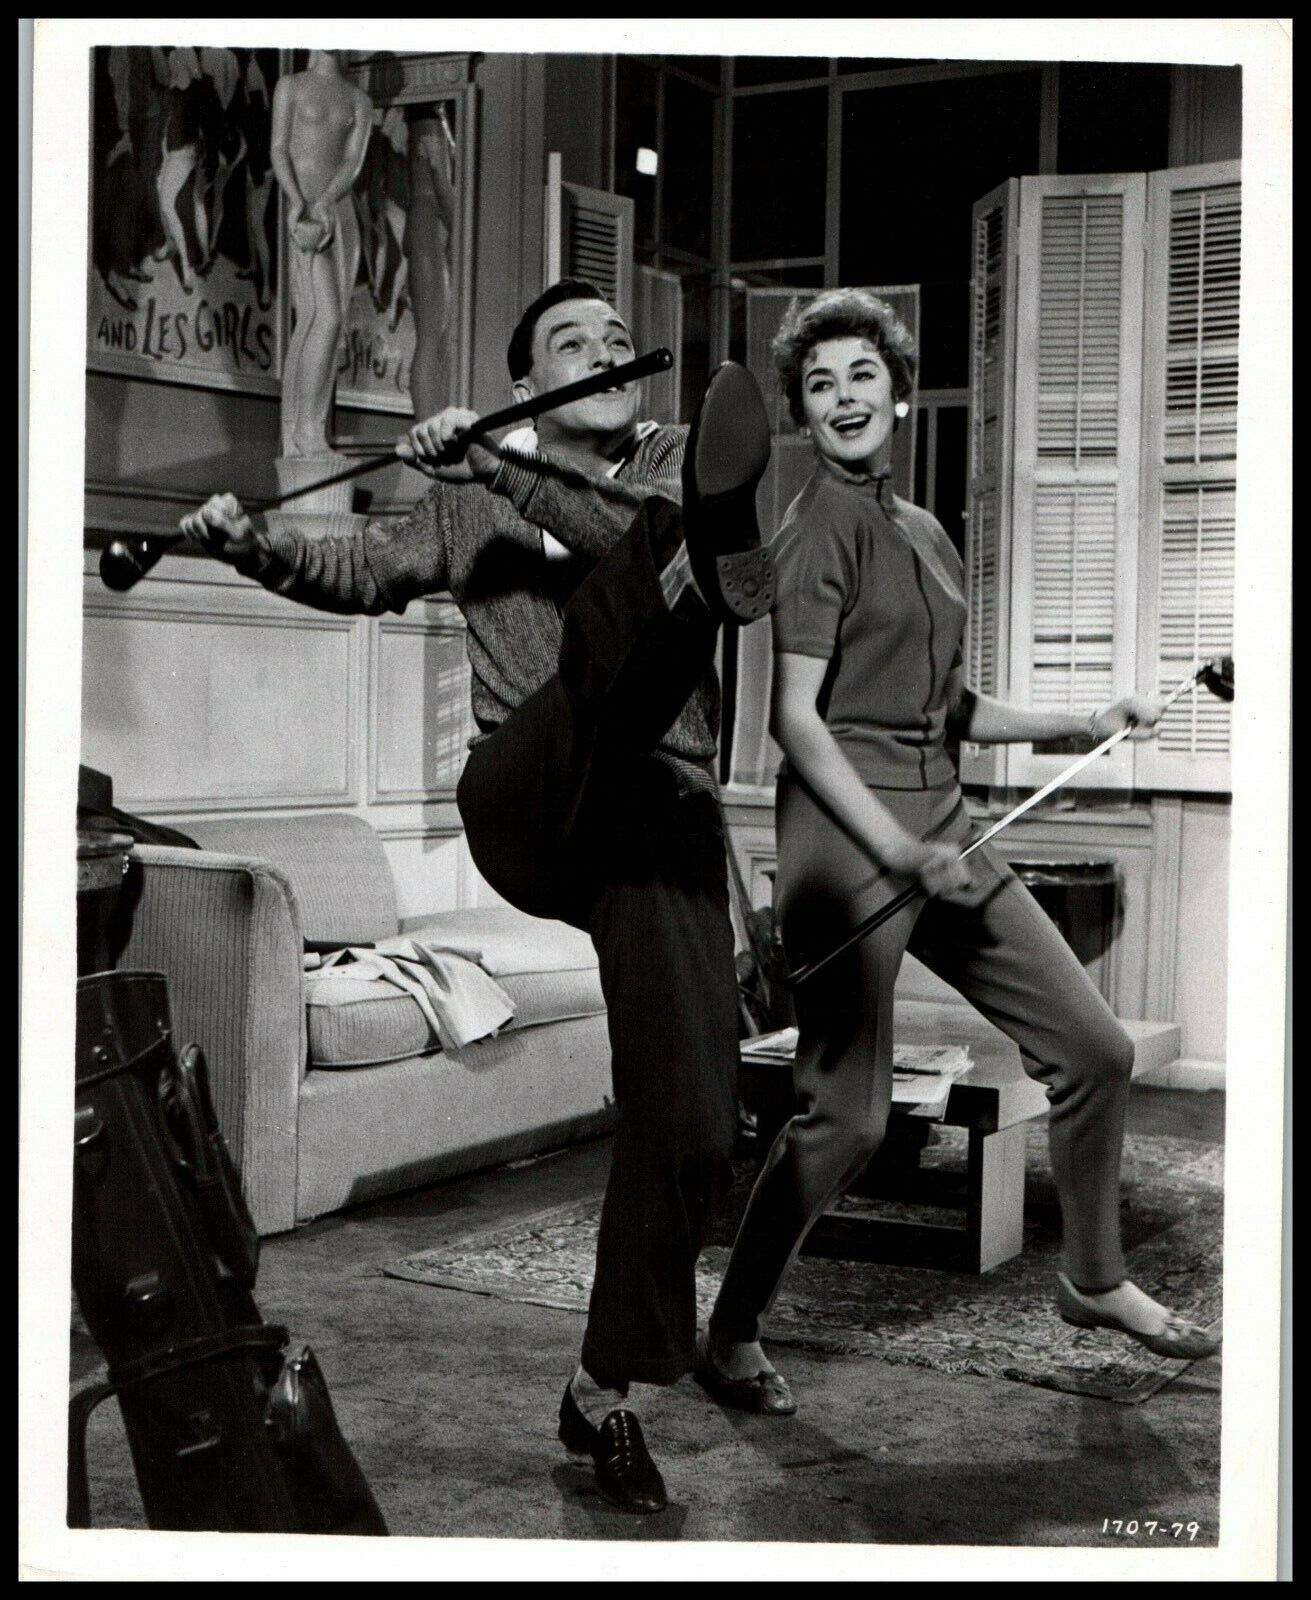 KAY KENDALL DANCING COUPLE HOLLYWOOD GENE KELLY HANDSOME 1957 ORIG Photo 526